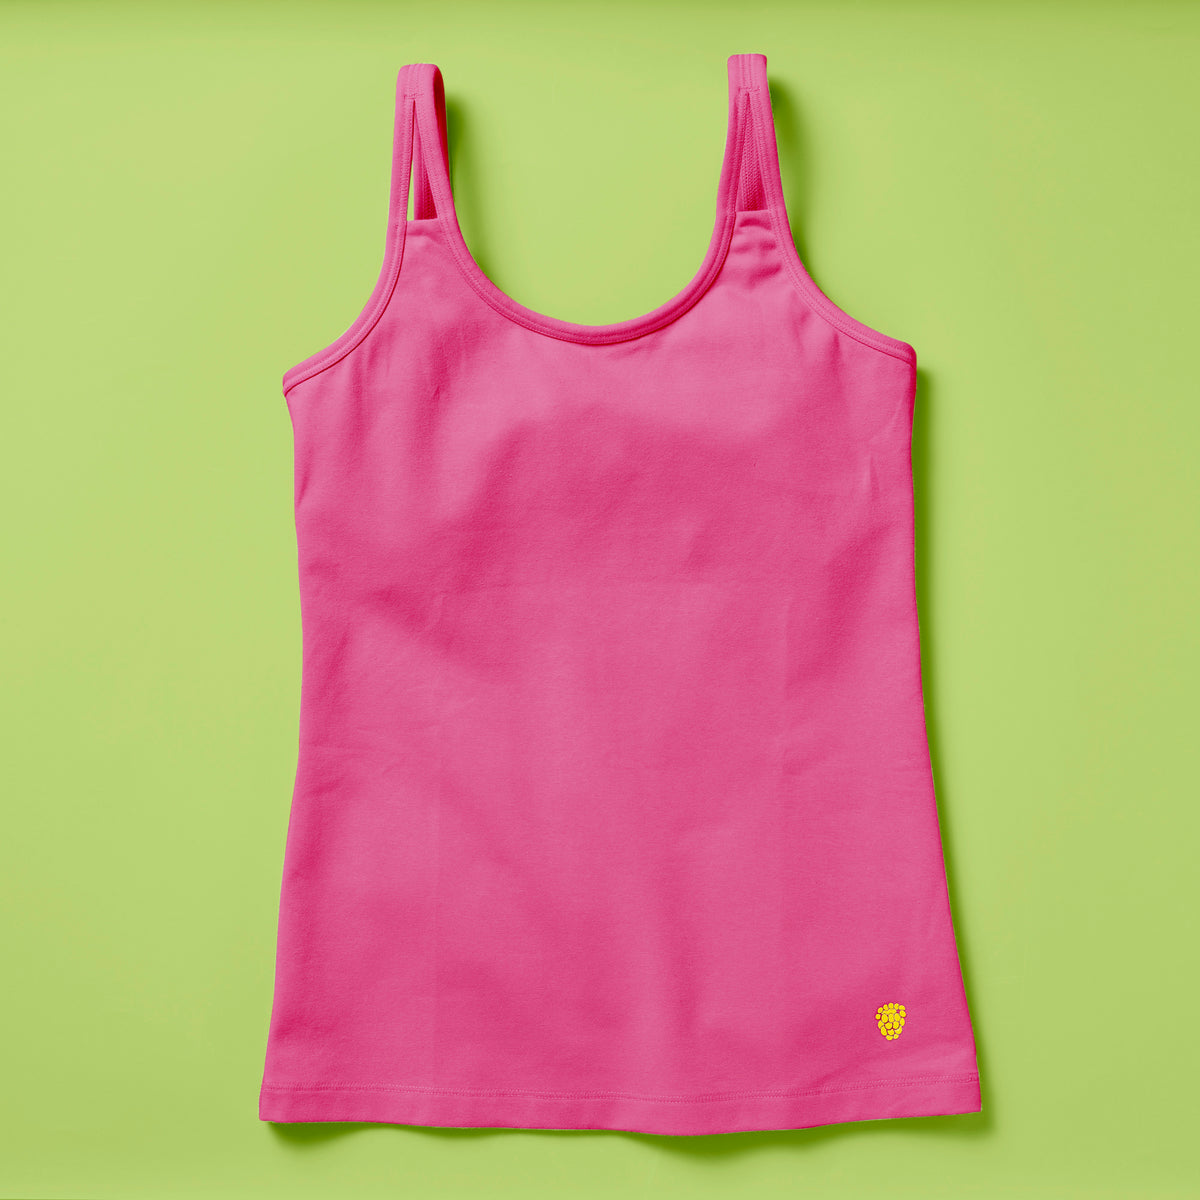 Shell Camisole